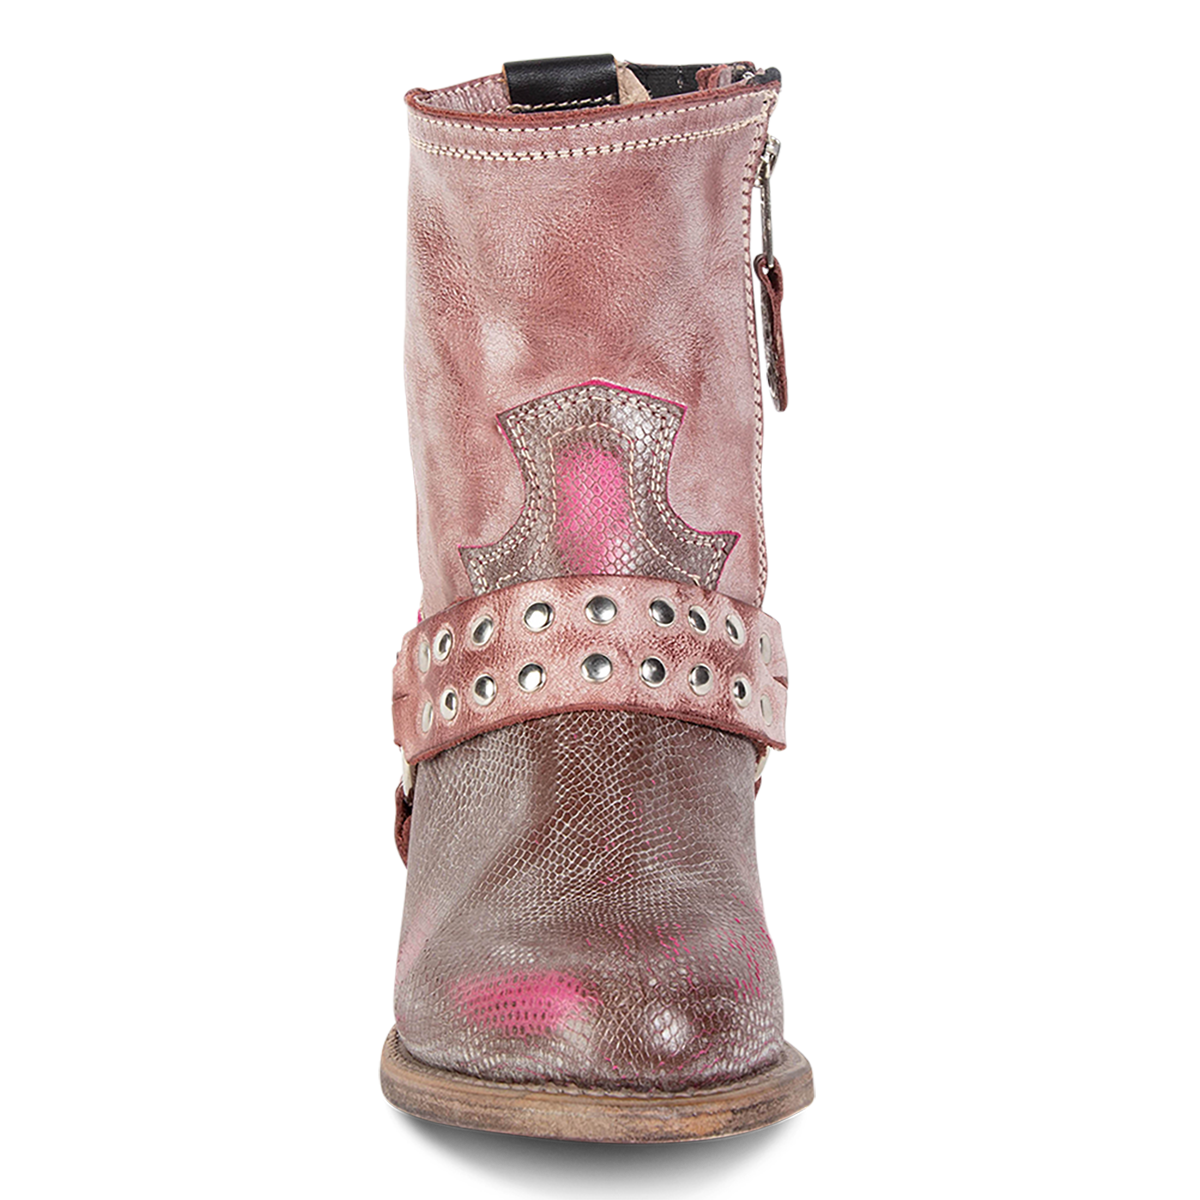 Front view showing western crown and embellished harness on FREEBIRD women's Ramone fuchsia multi leather bootie